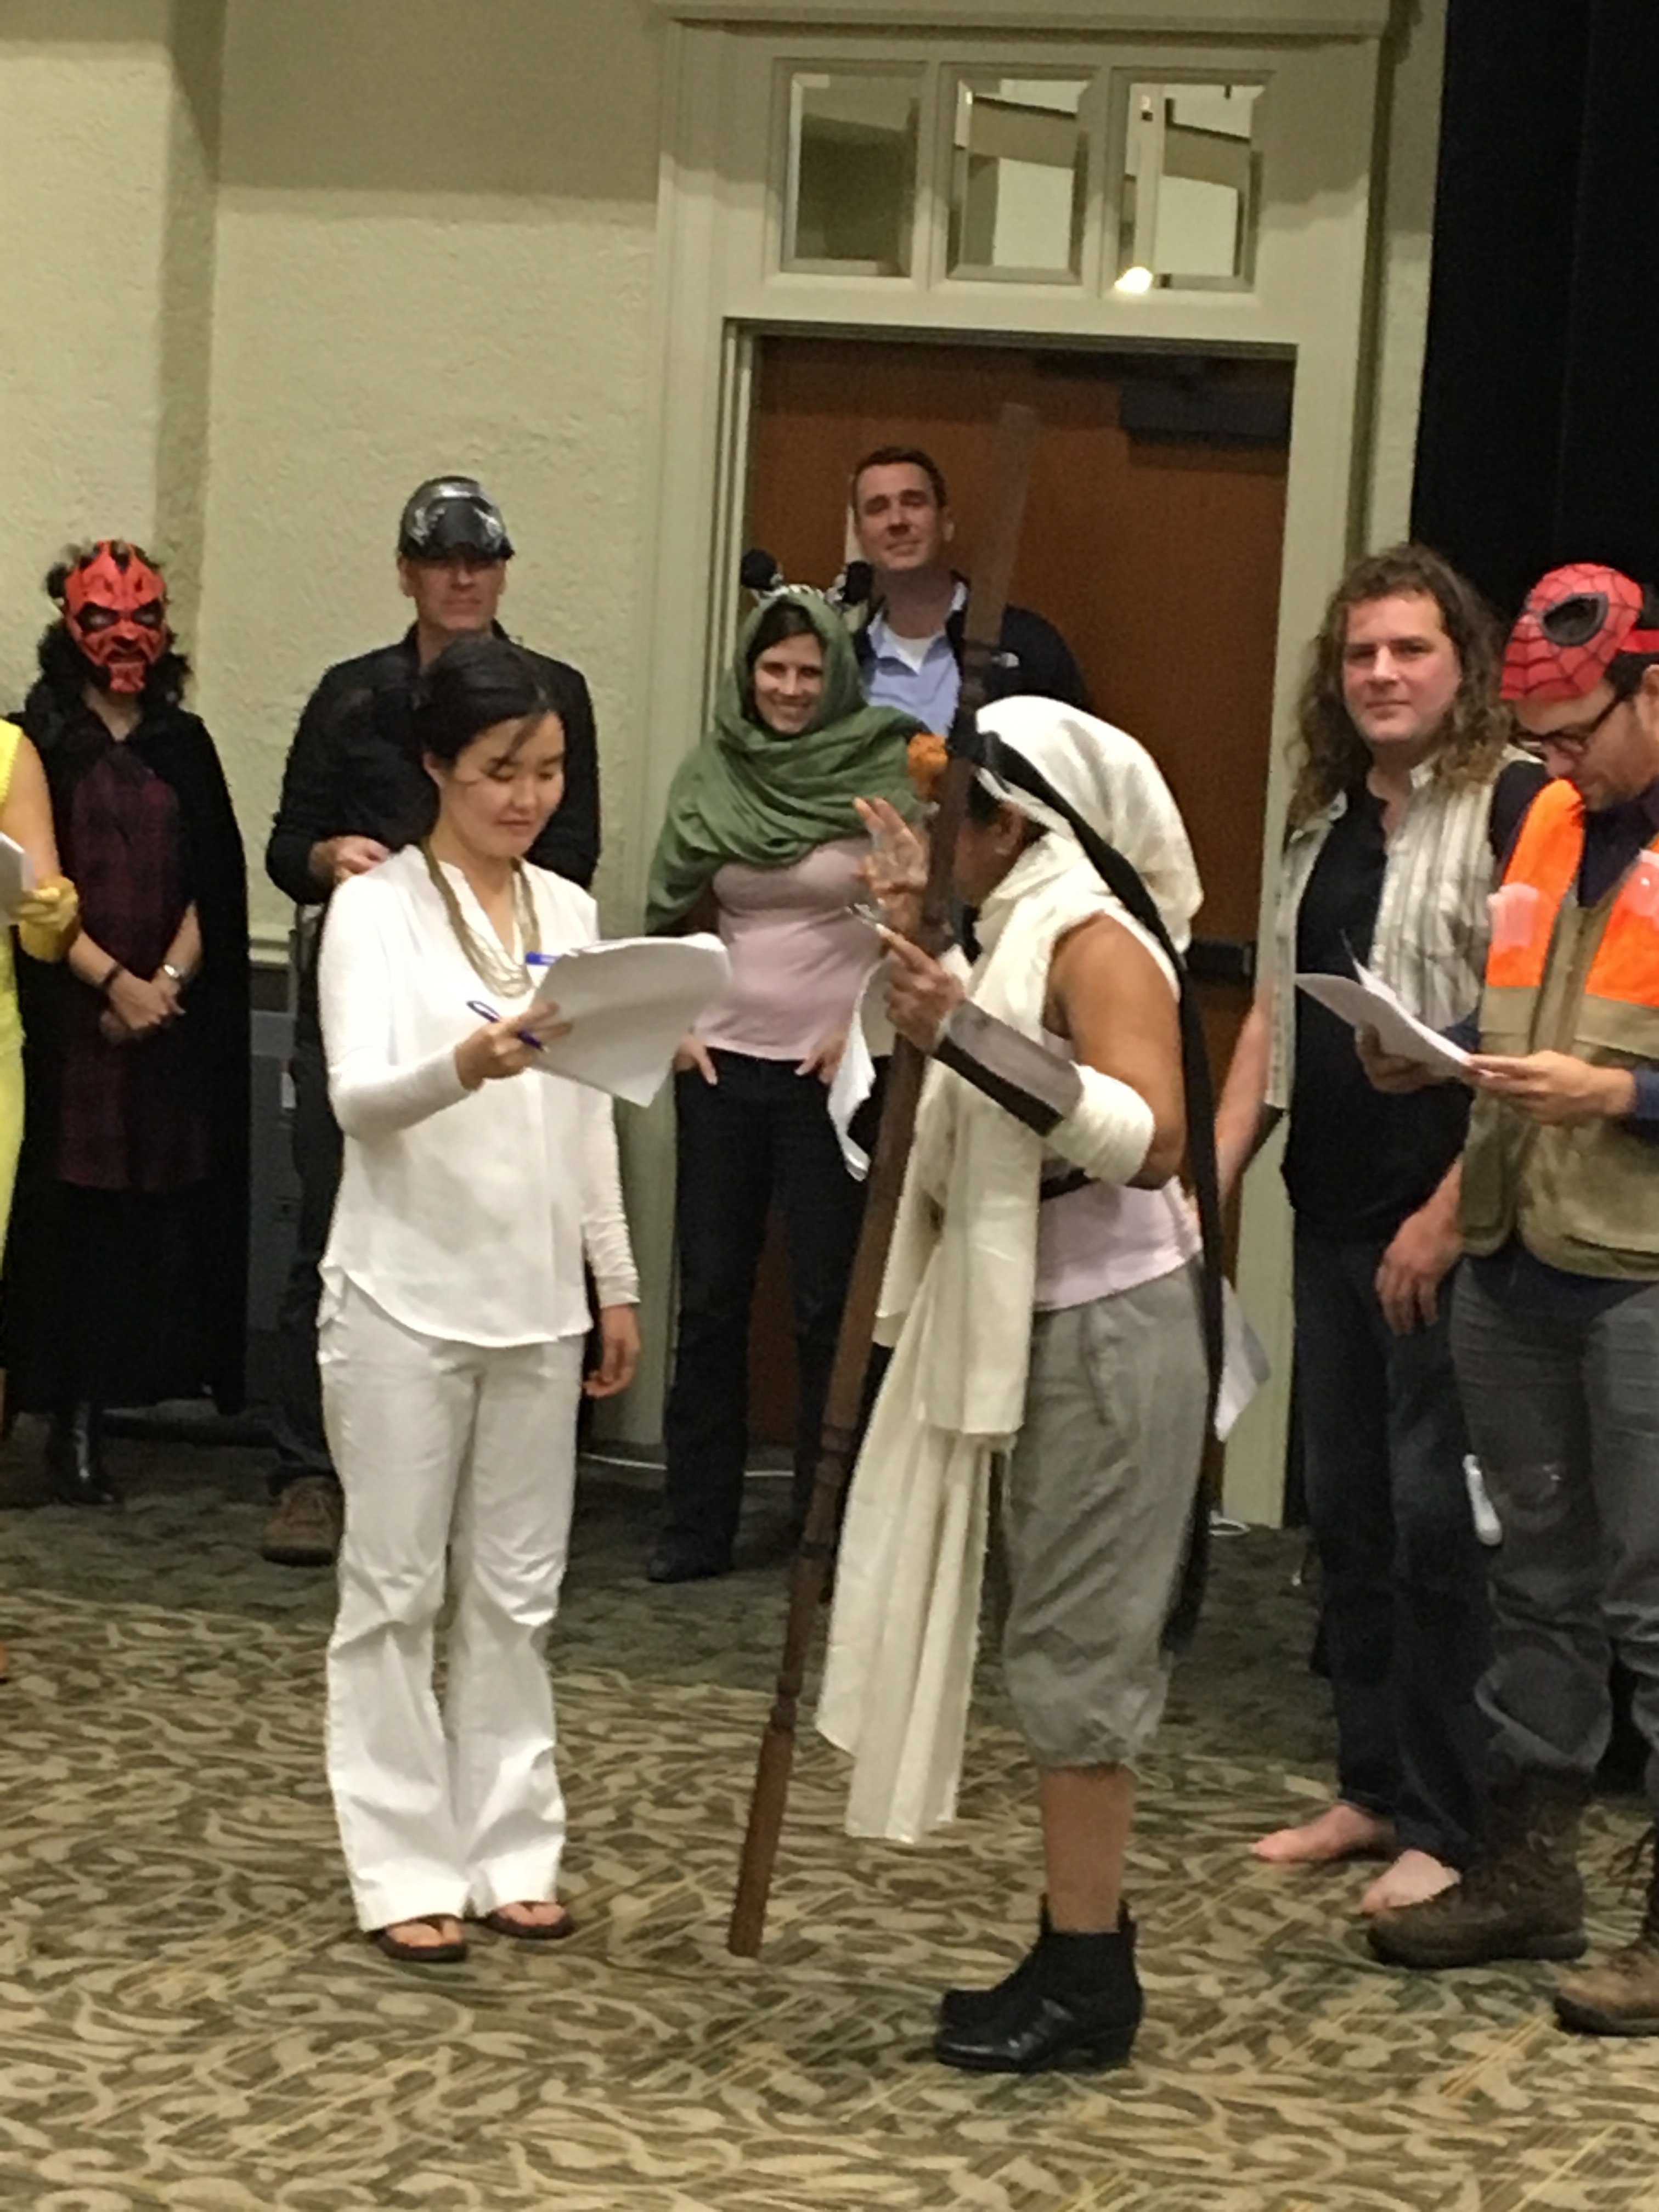 Rehearsing for the 2016 Faculty Skit